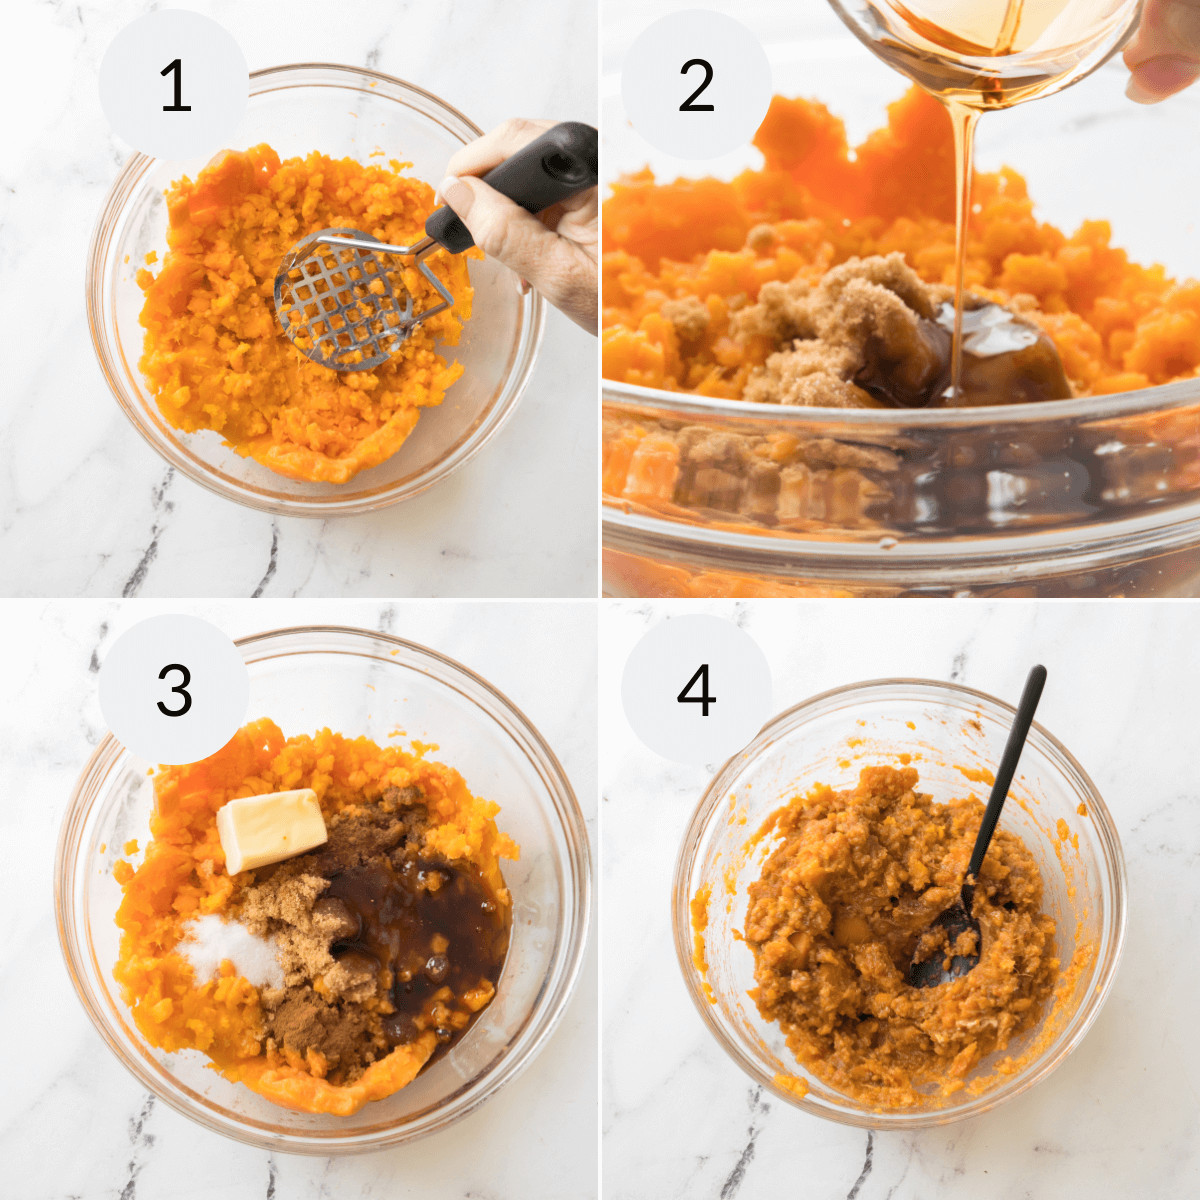 Making a sweet potato mixture and adding the delicious additions to the potatoes.